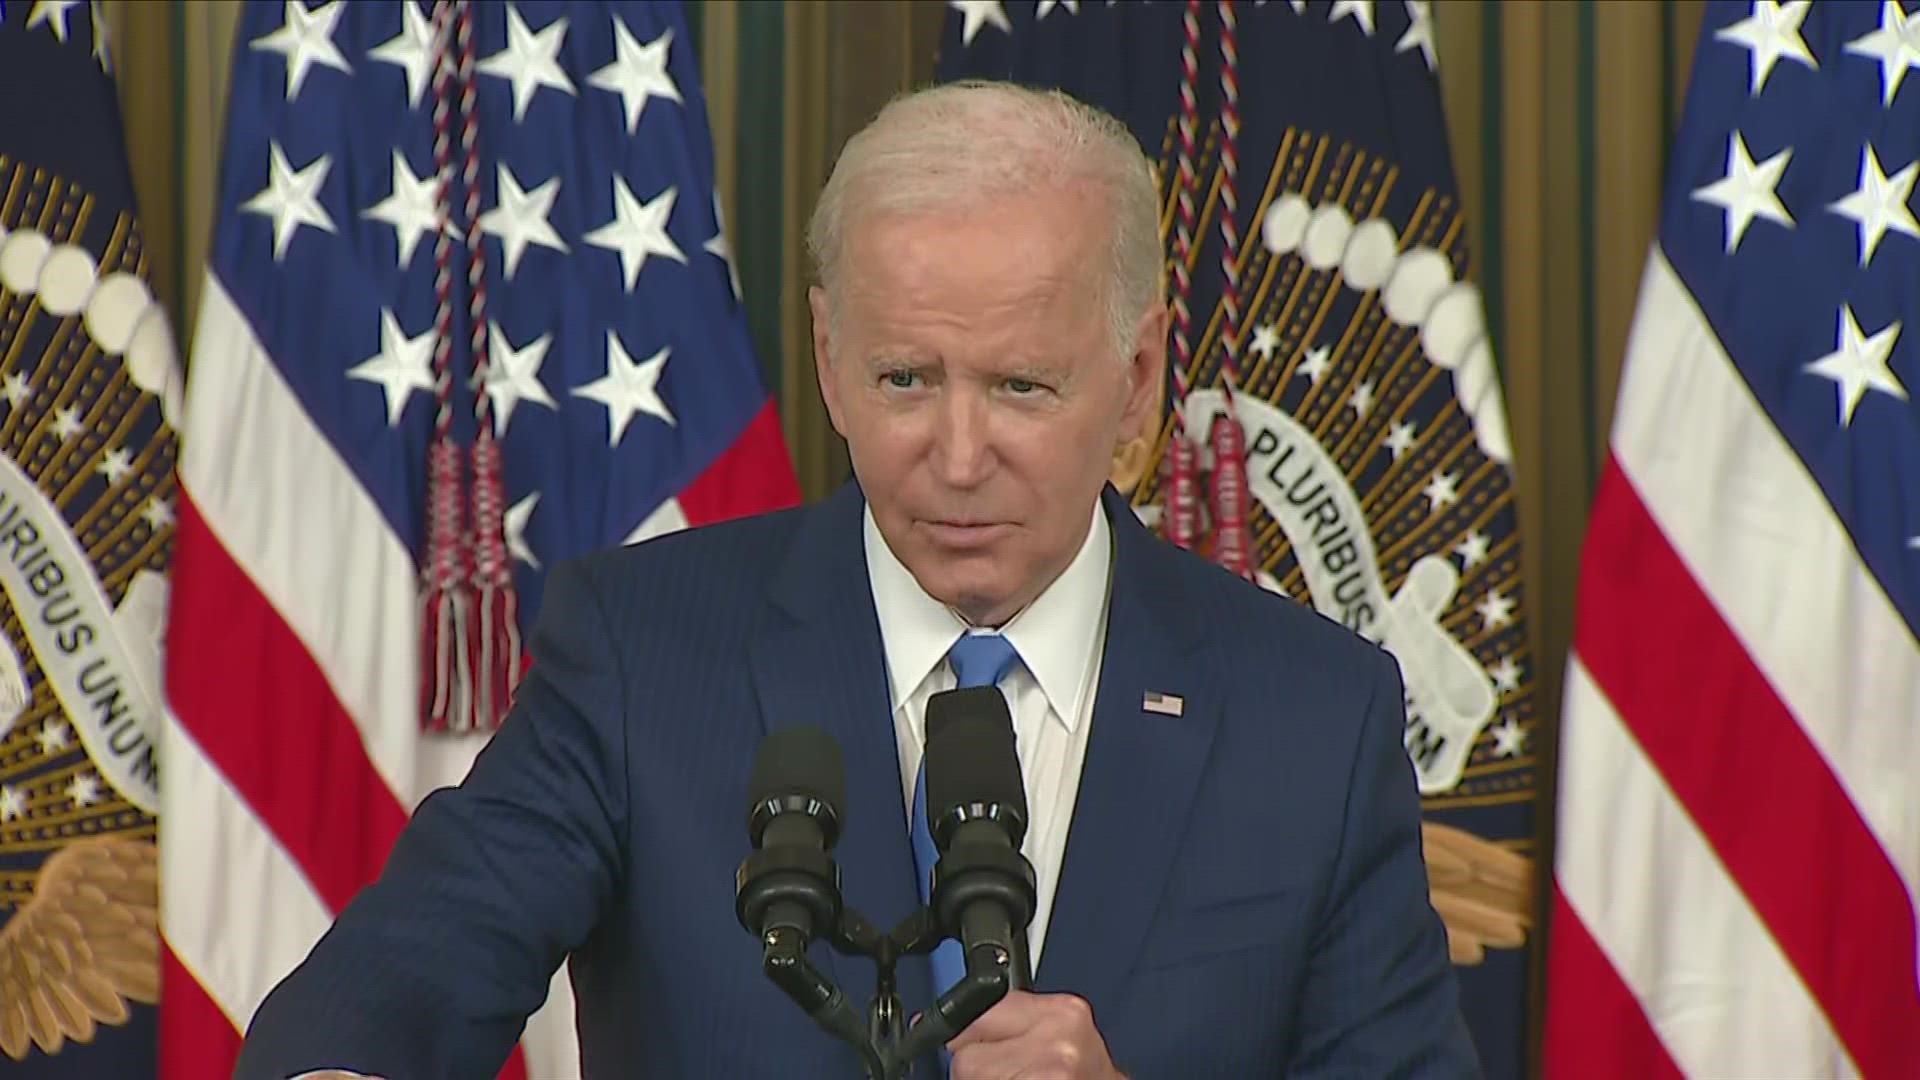 Biden said Wednesday he hopes Russia will be more willing to negotiate Brittney Griner's release now that the midterm elections are over.